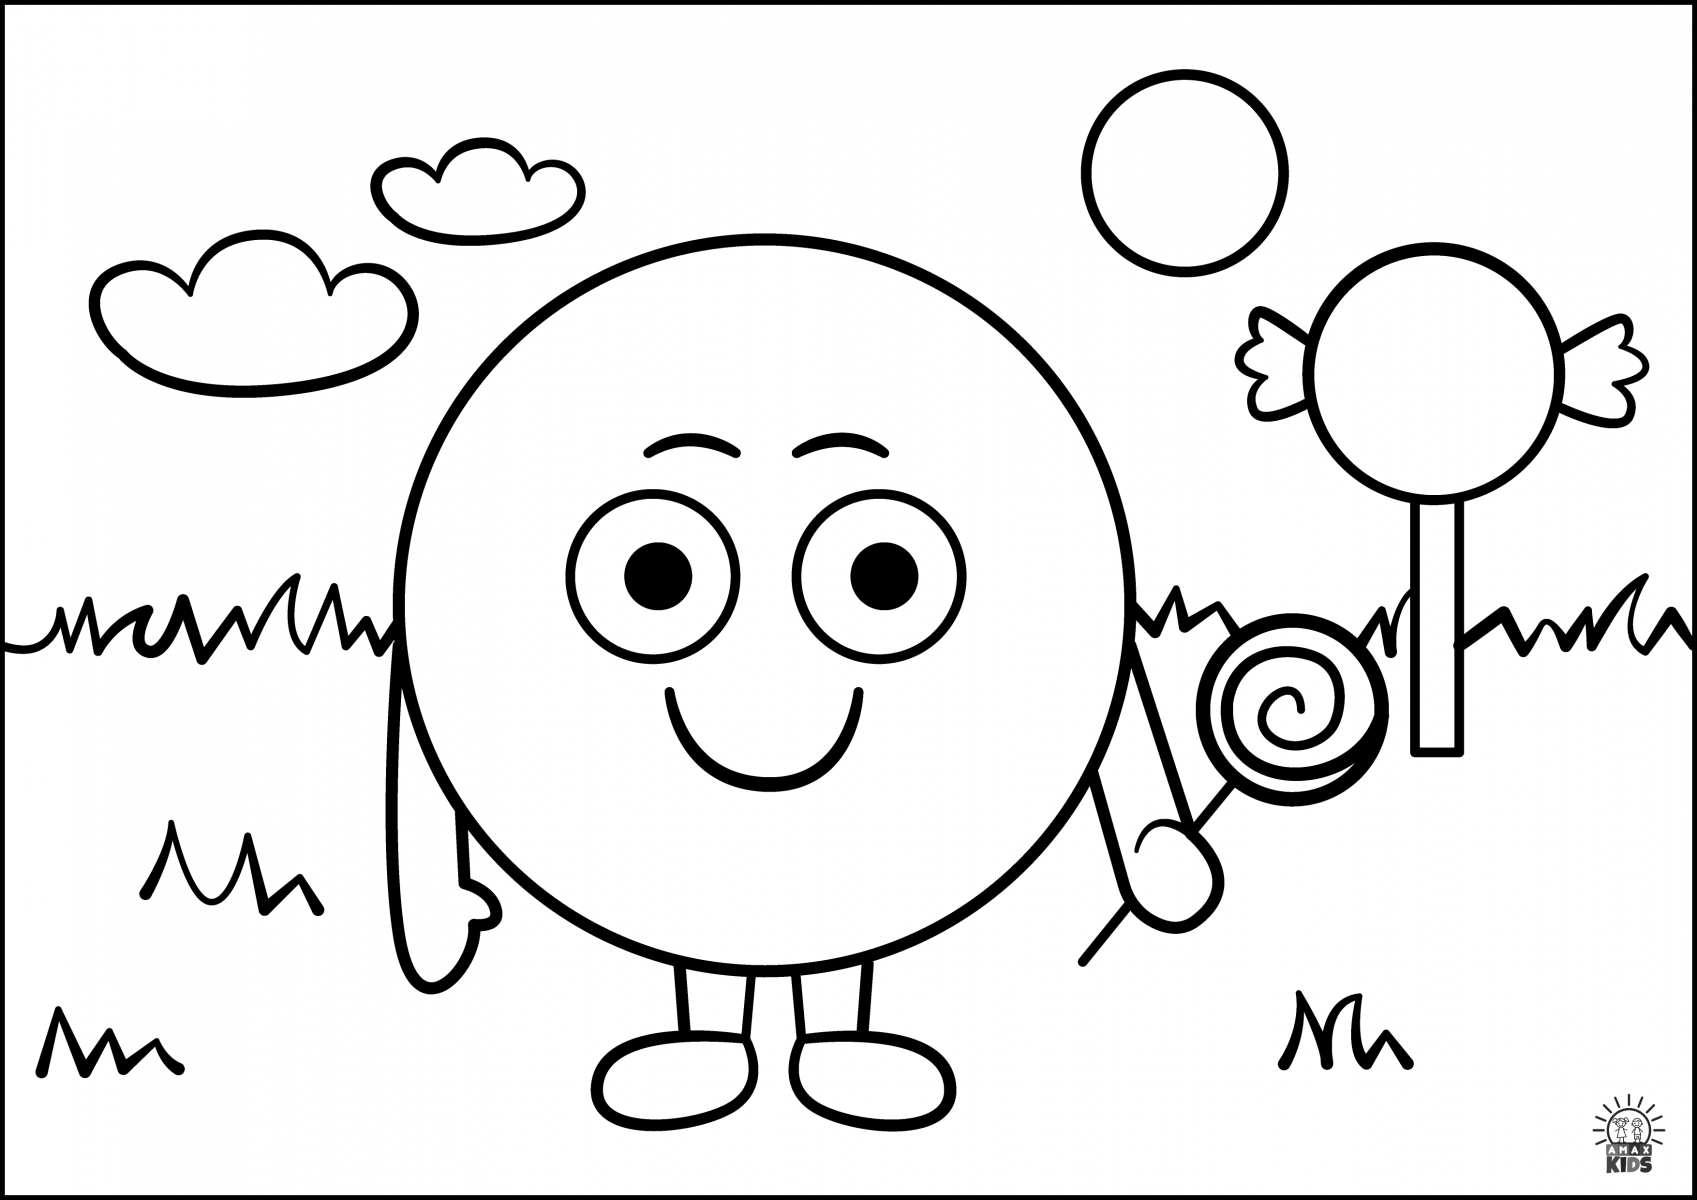 Coloring pages for kids – Shapes | Amax ...